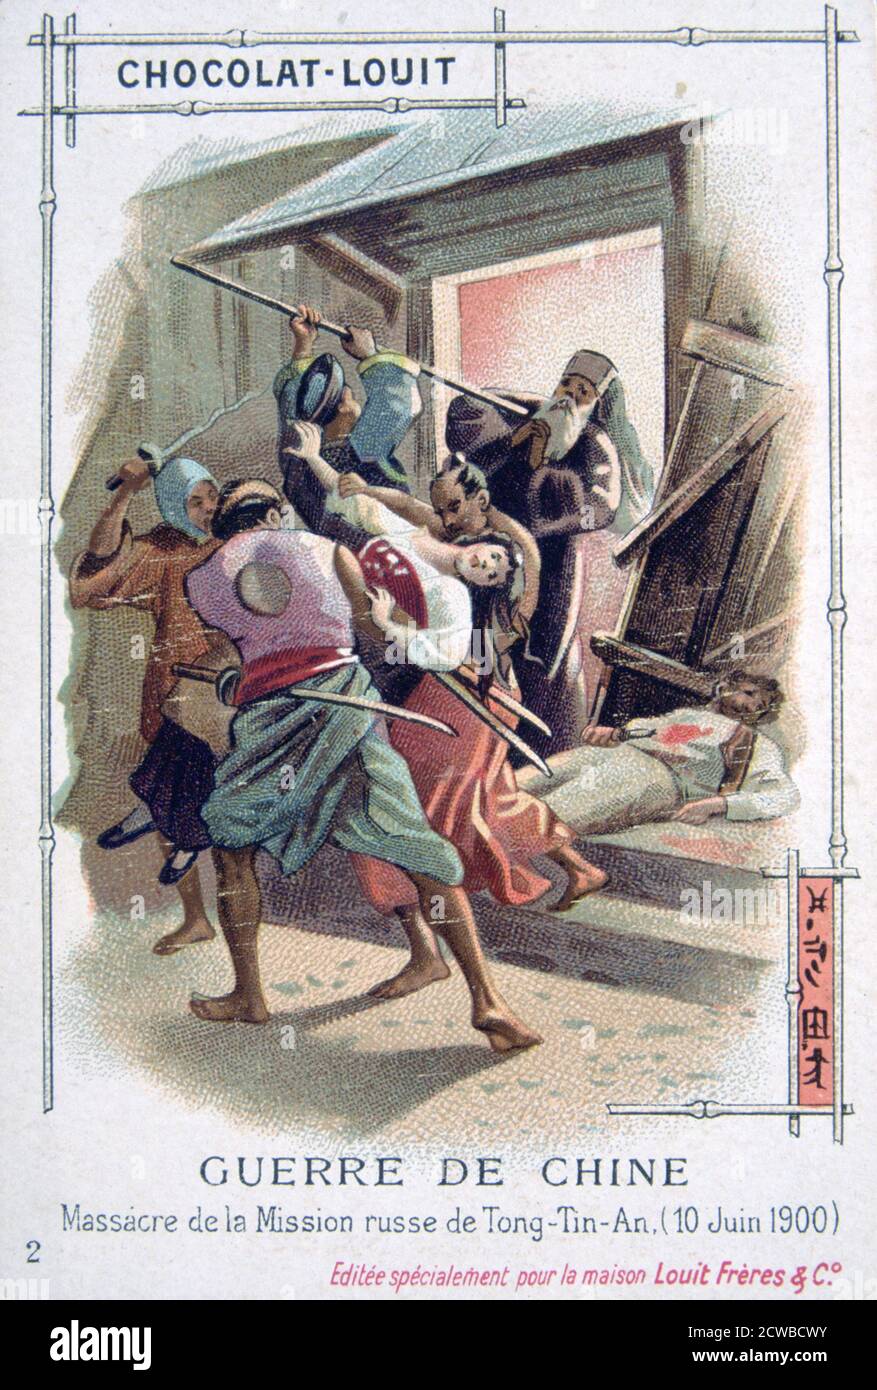 Massacre in the Russian Mission of Tong-Tin-An, Boxer Rebellion, China, 10 June 1900. The Boxer Uprising or Boxer Rebellion was a Chinese rebellion from November 1899 to September 7, 1901 against foreign influence in trade, politics, religion and technology in China during the final years of the Qing Dynasty. French trading card advertising Chocolat-Louit. The artist is unknown. Stock Photo